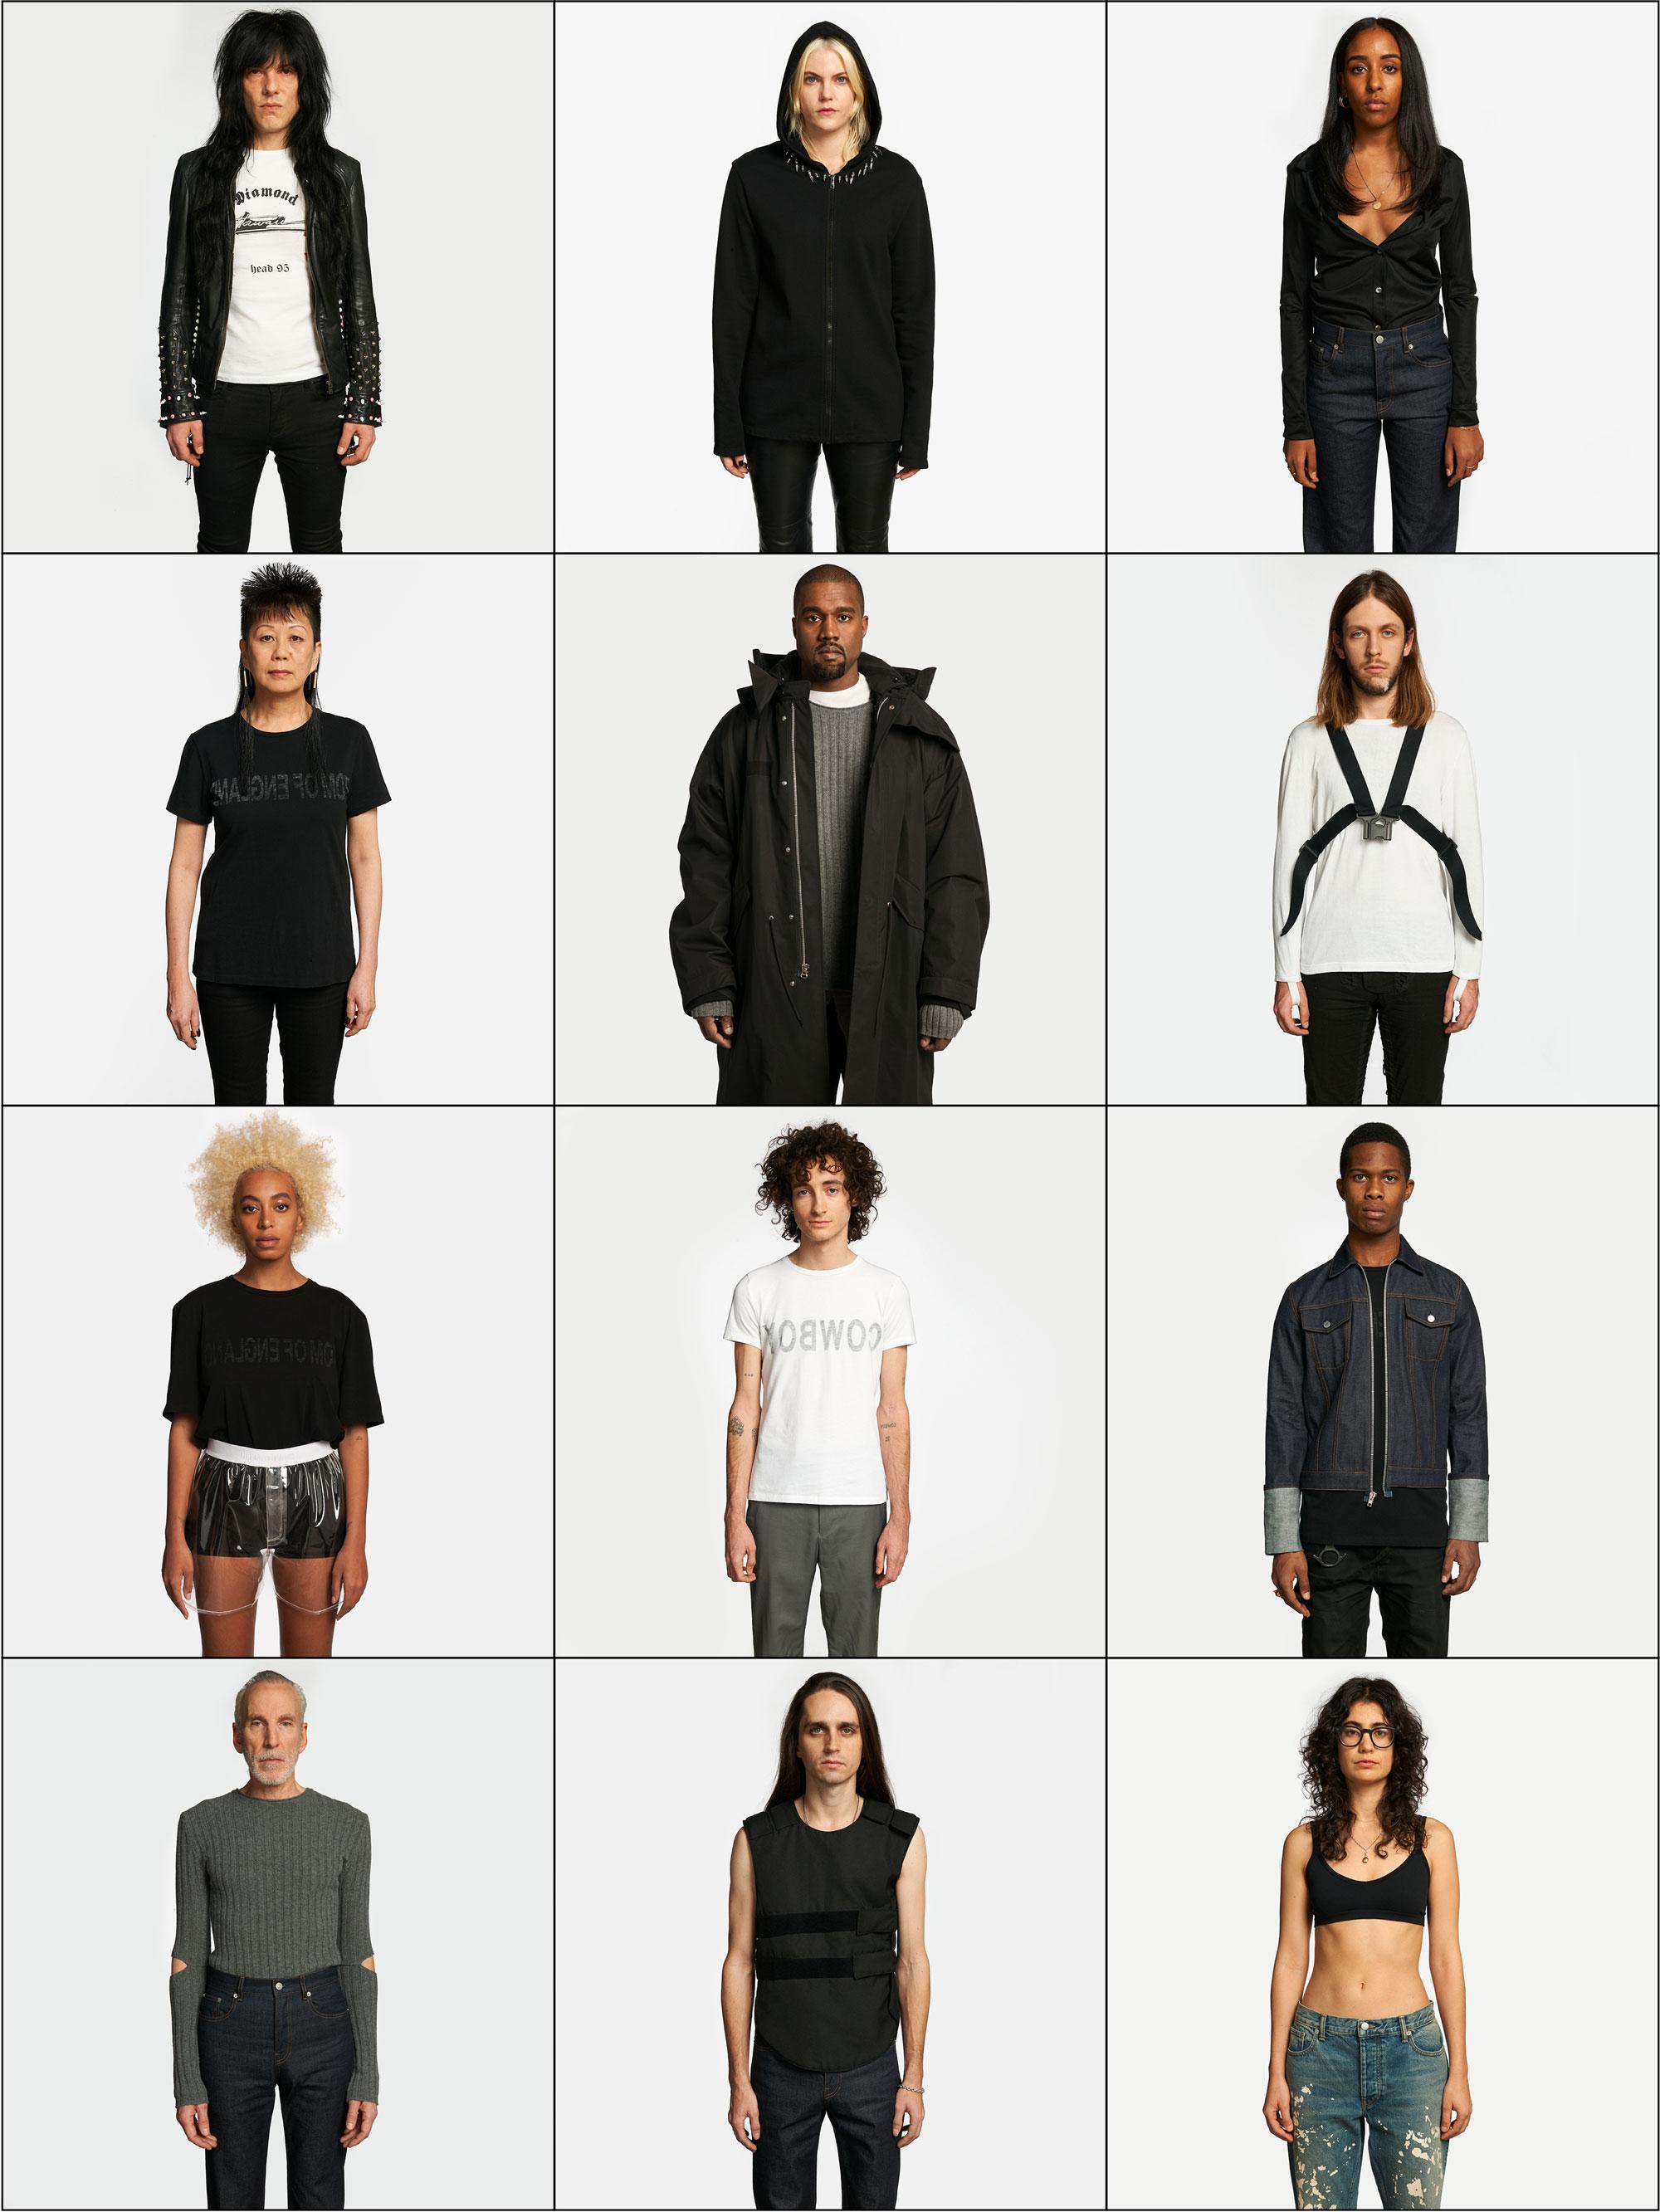 Kanye West and Solange Star in New Helmut Lang Campaign - Daily Front Row